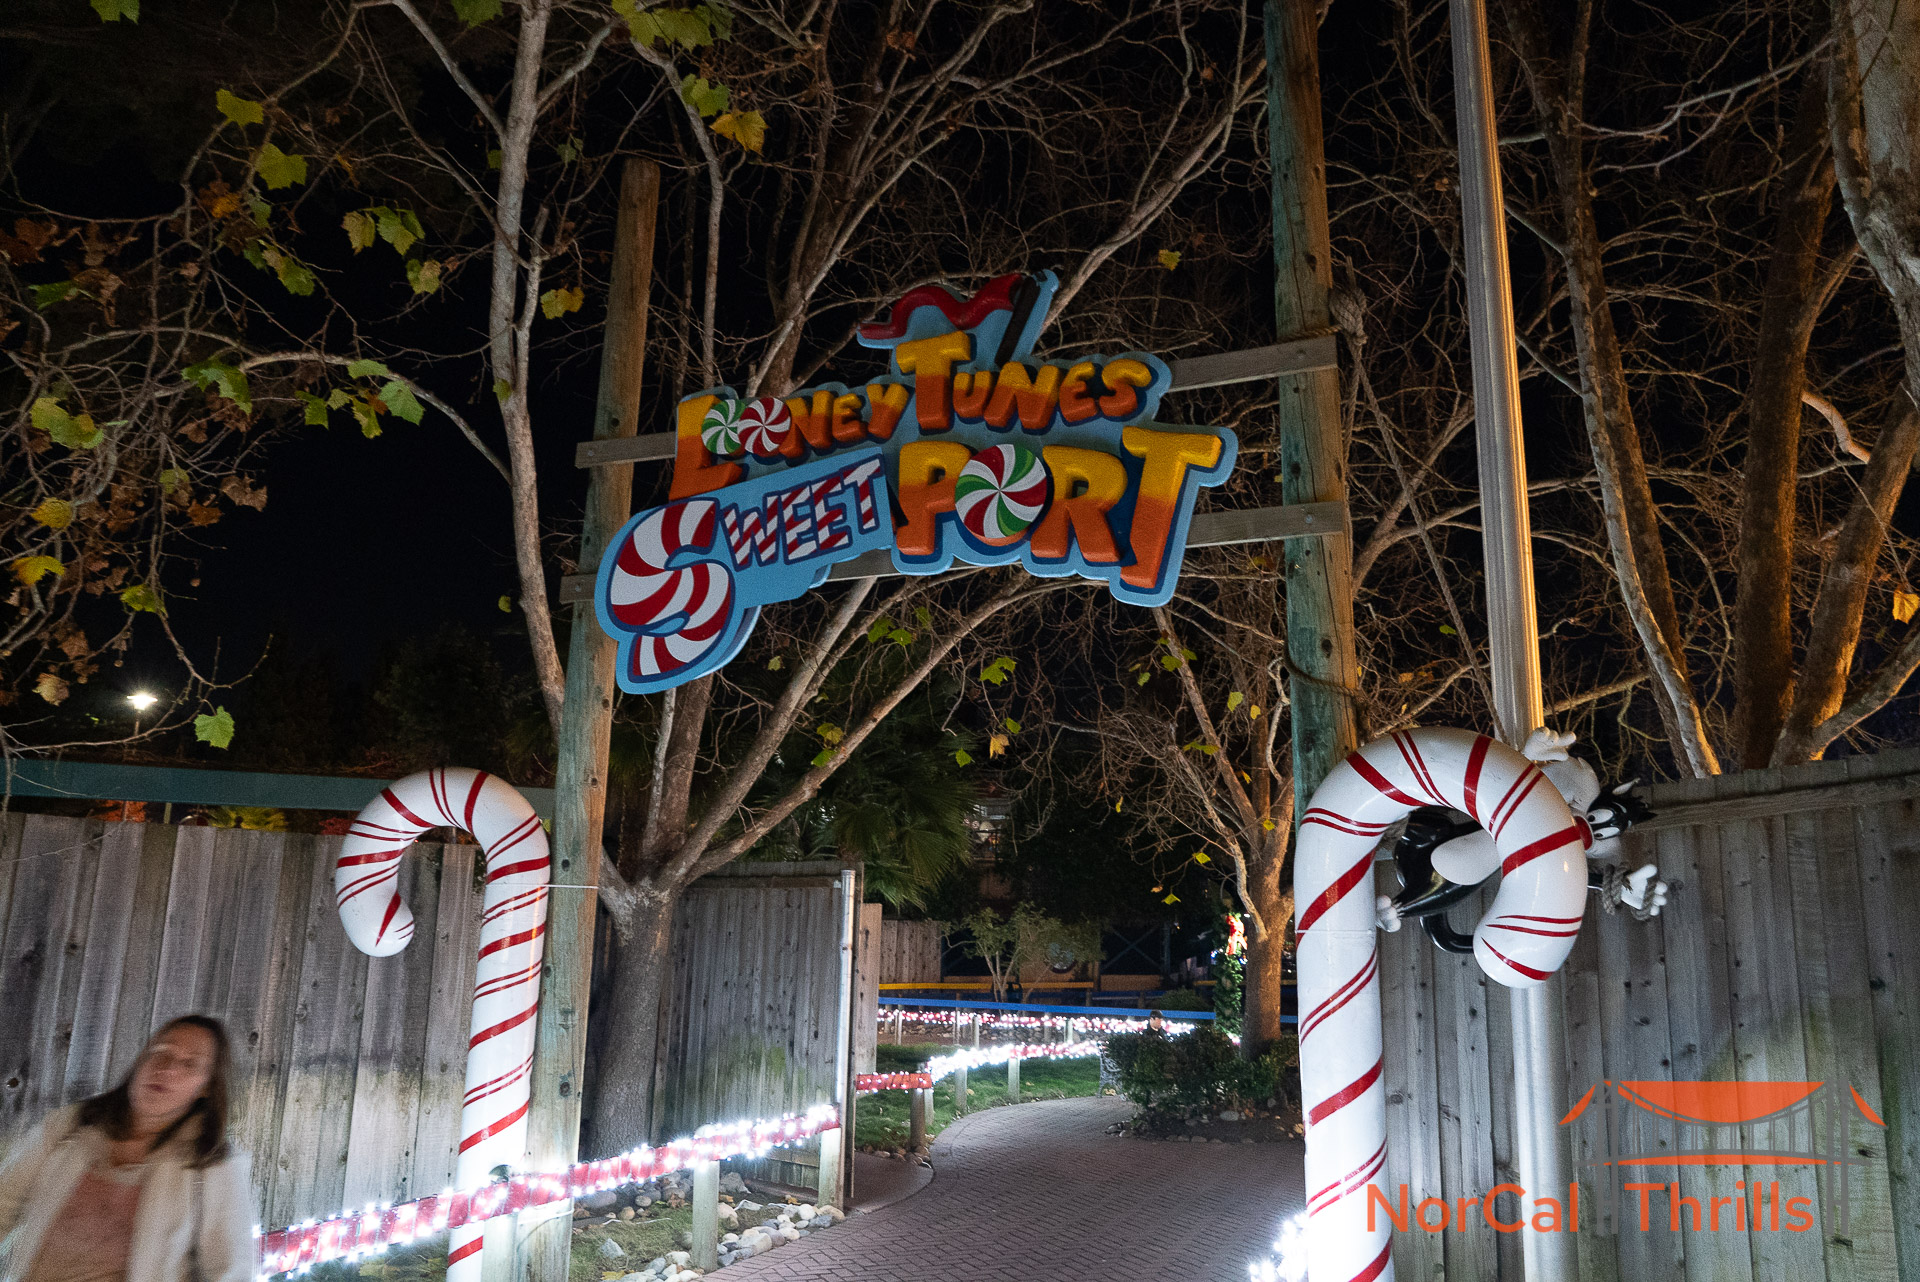 Holiday in the Park | Looney Tunes Sweetport